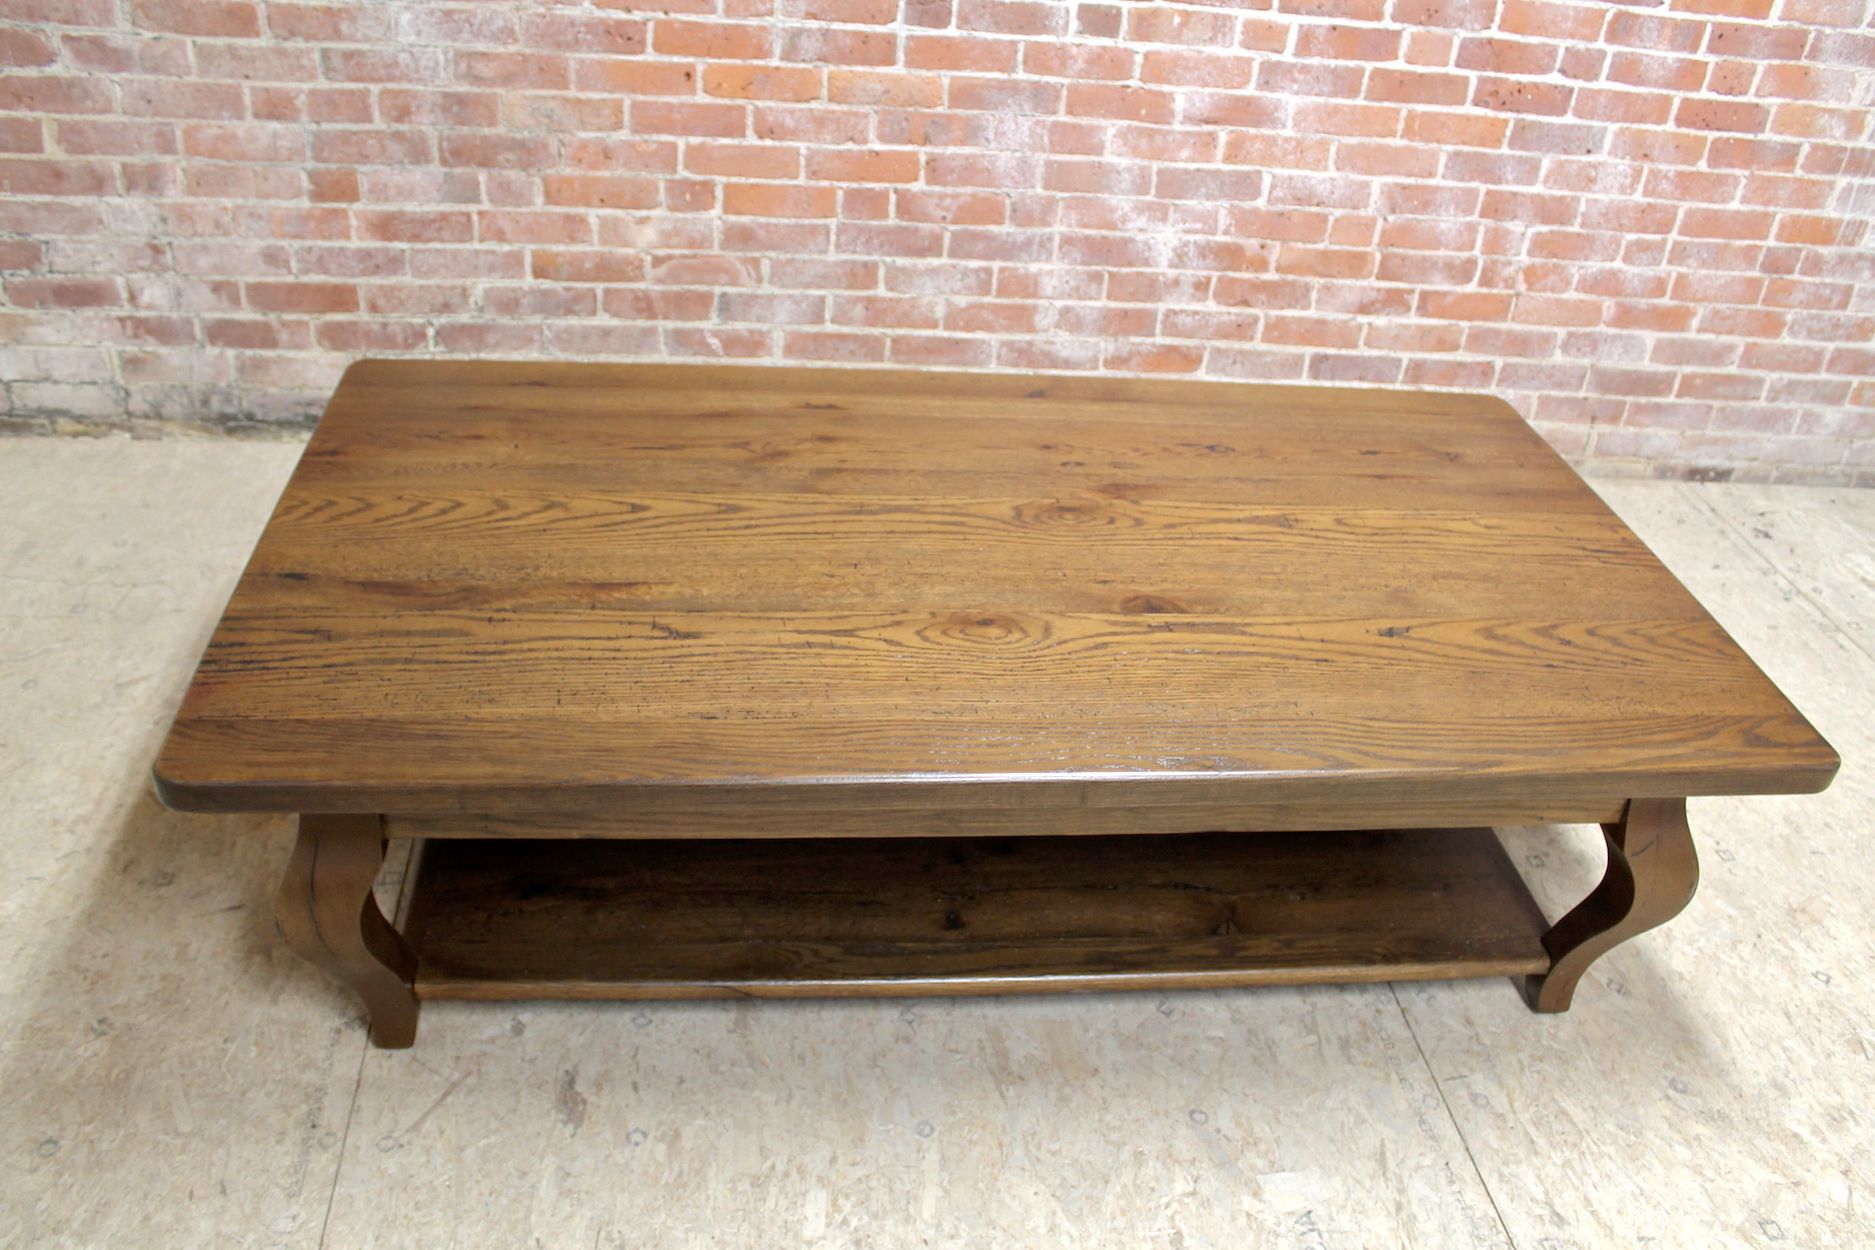 Vintage Gray Oak Coffee Tables Intended For Recent 66in Oak Coffee Table In Antique Walnut Finish – Ecustomfinishes (View 9 of 10)